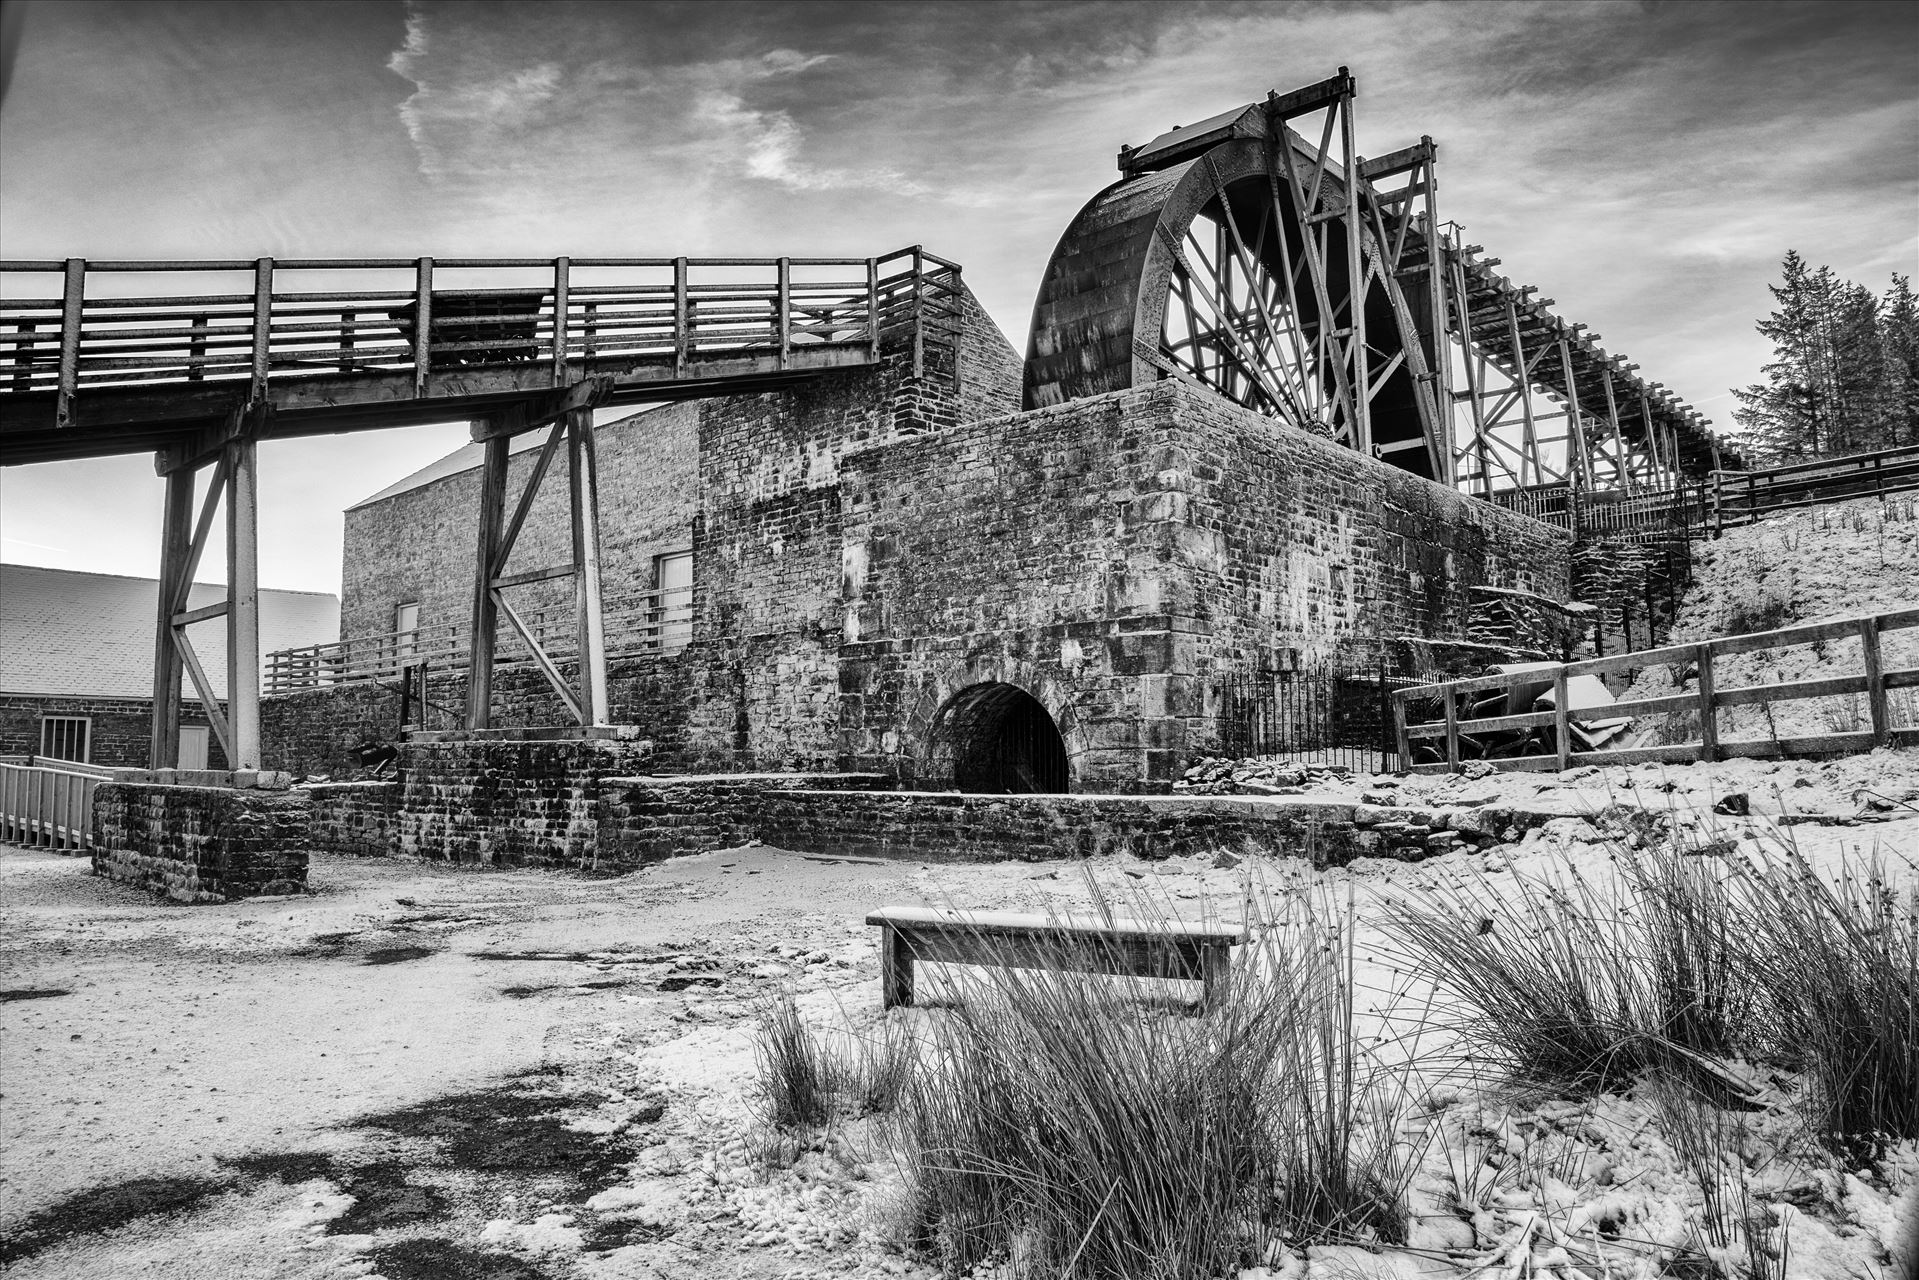 The water wheel at Killhope lead mine, Weardale - One of the main features of the reconstructed mine is the Killhope Wheel, a 10-metre-diameter metal waterwheel. This was constructed by the Tyneside firm of William Armstrong. by philreay